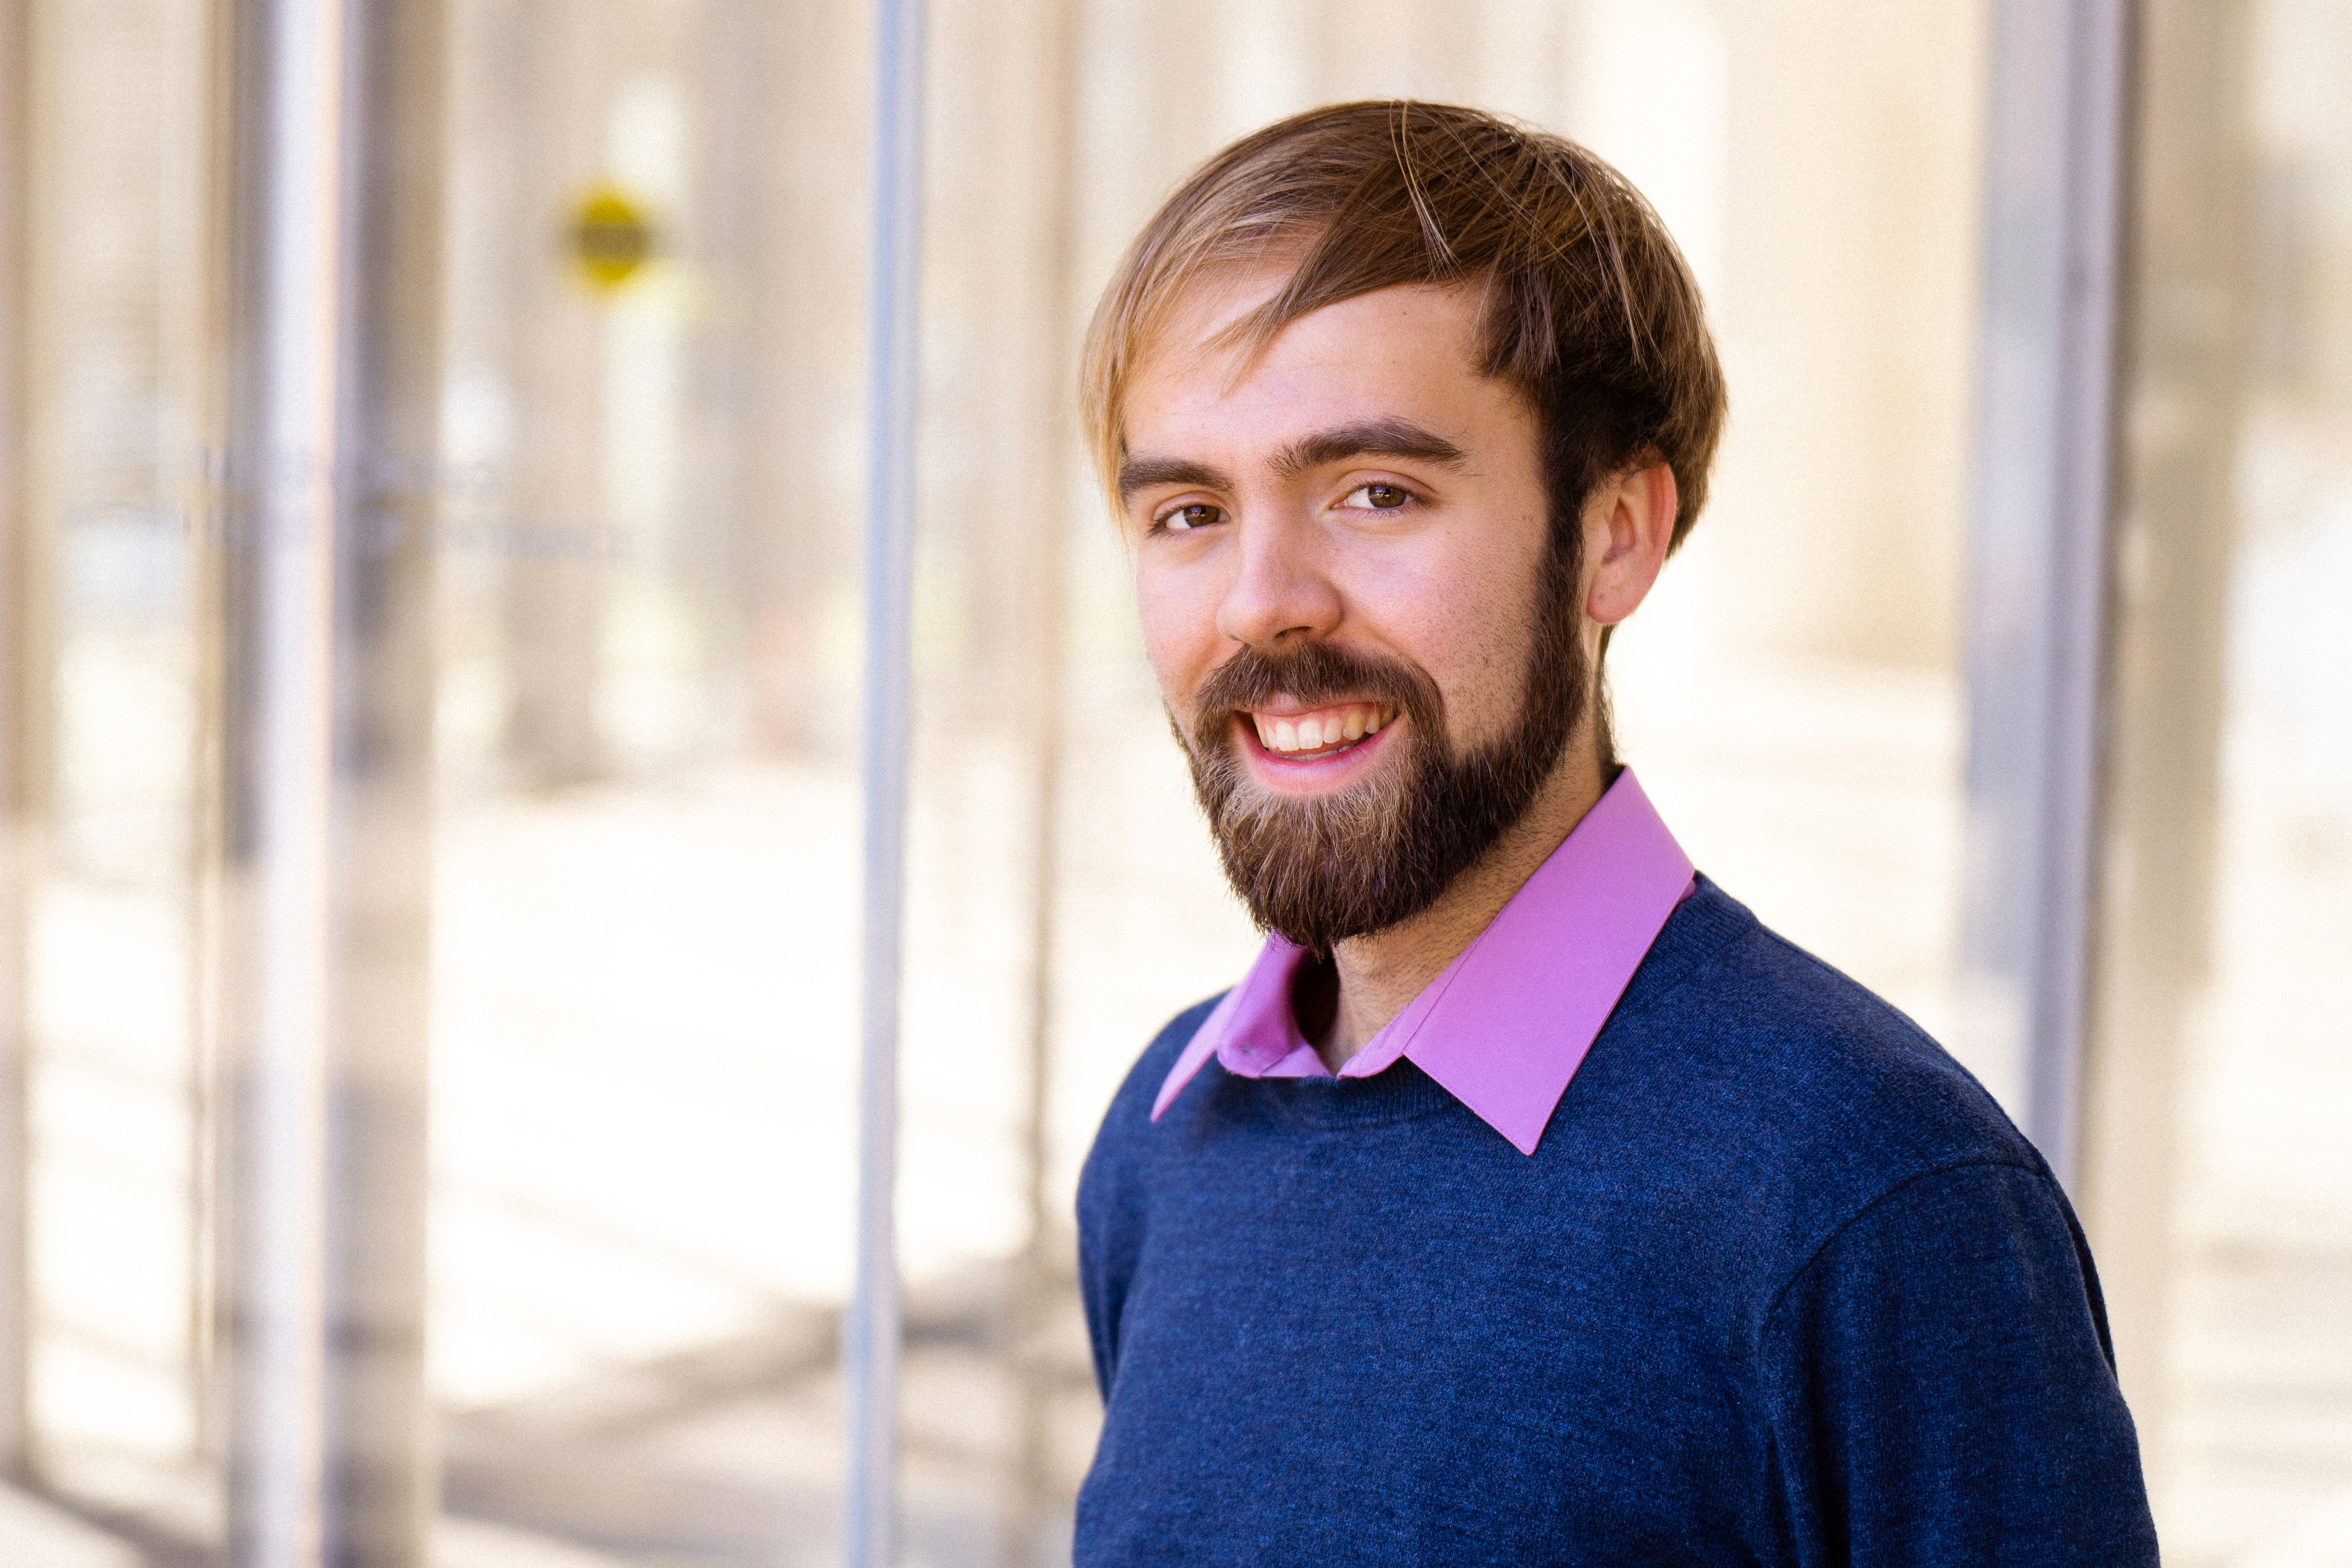 MIT computer science and philosophy double-major Matthew Kearney aims to advance the field of AI ethics.